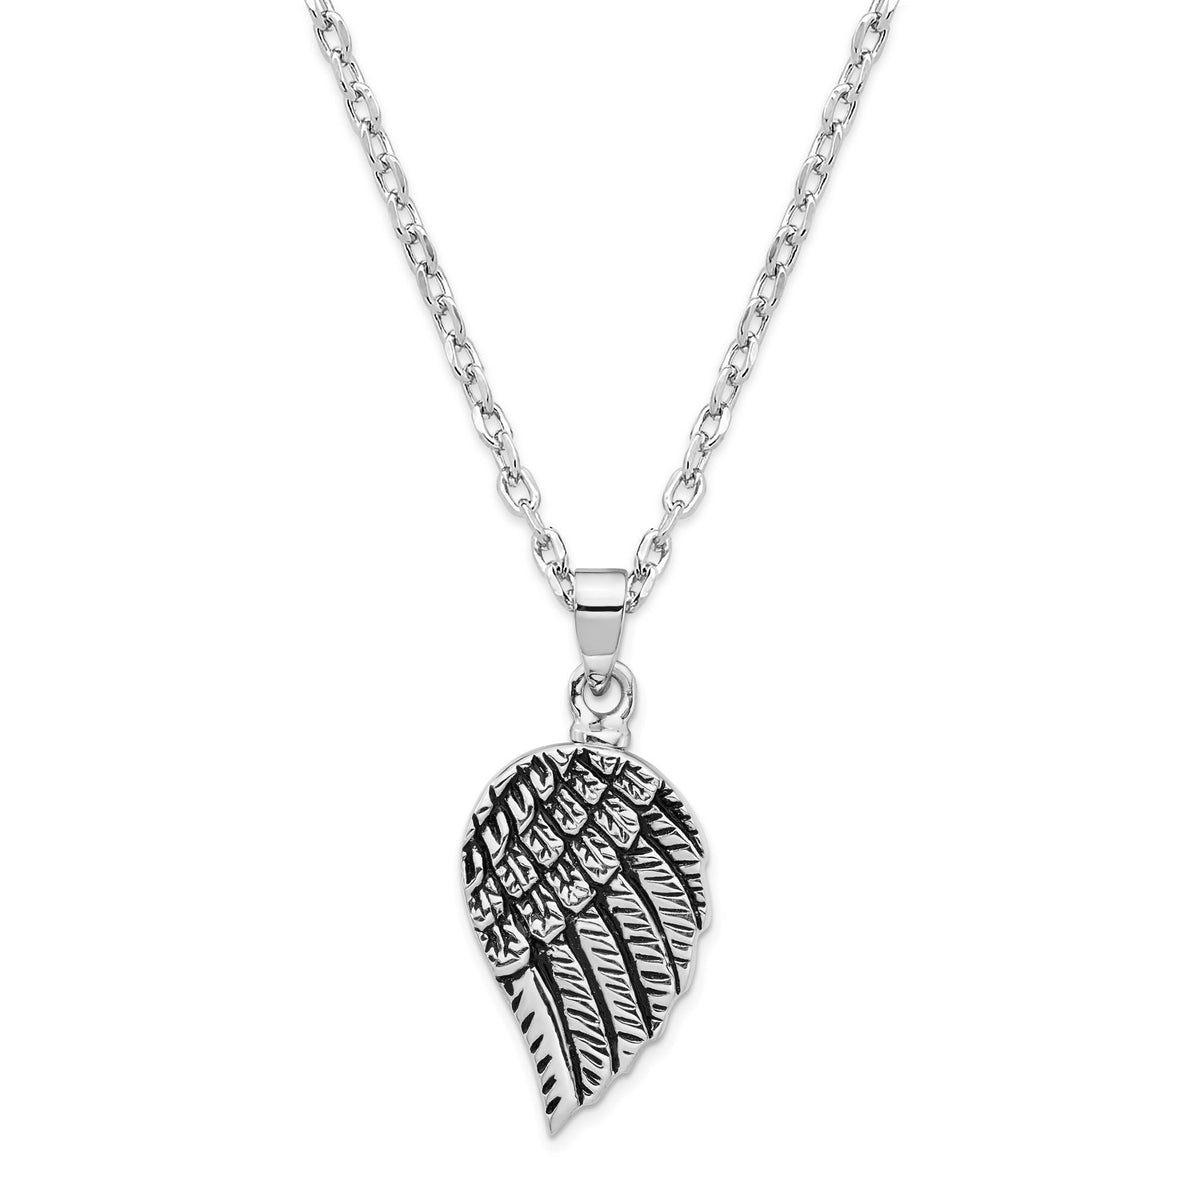 Solid Sterling Silver Screw Top Angel Wing Ash Holder Pendant Human Ashes or Pet Ashes - Gift Box Included Angel Wing Urn